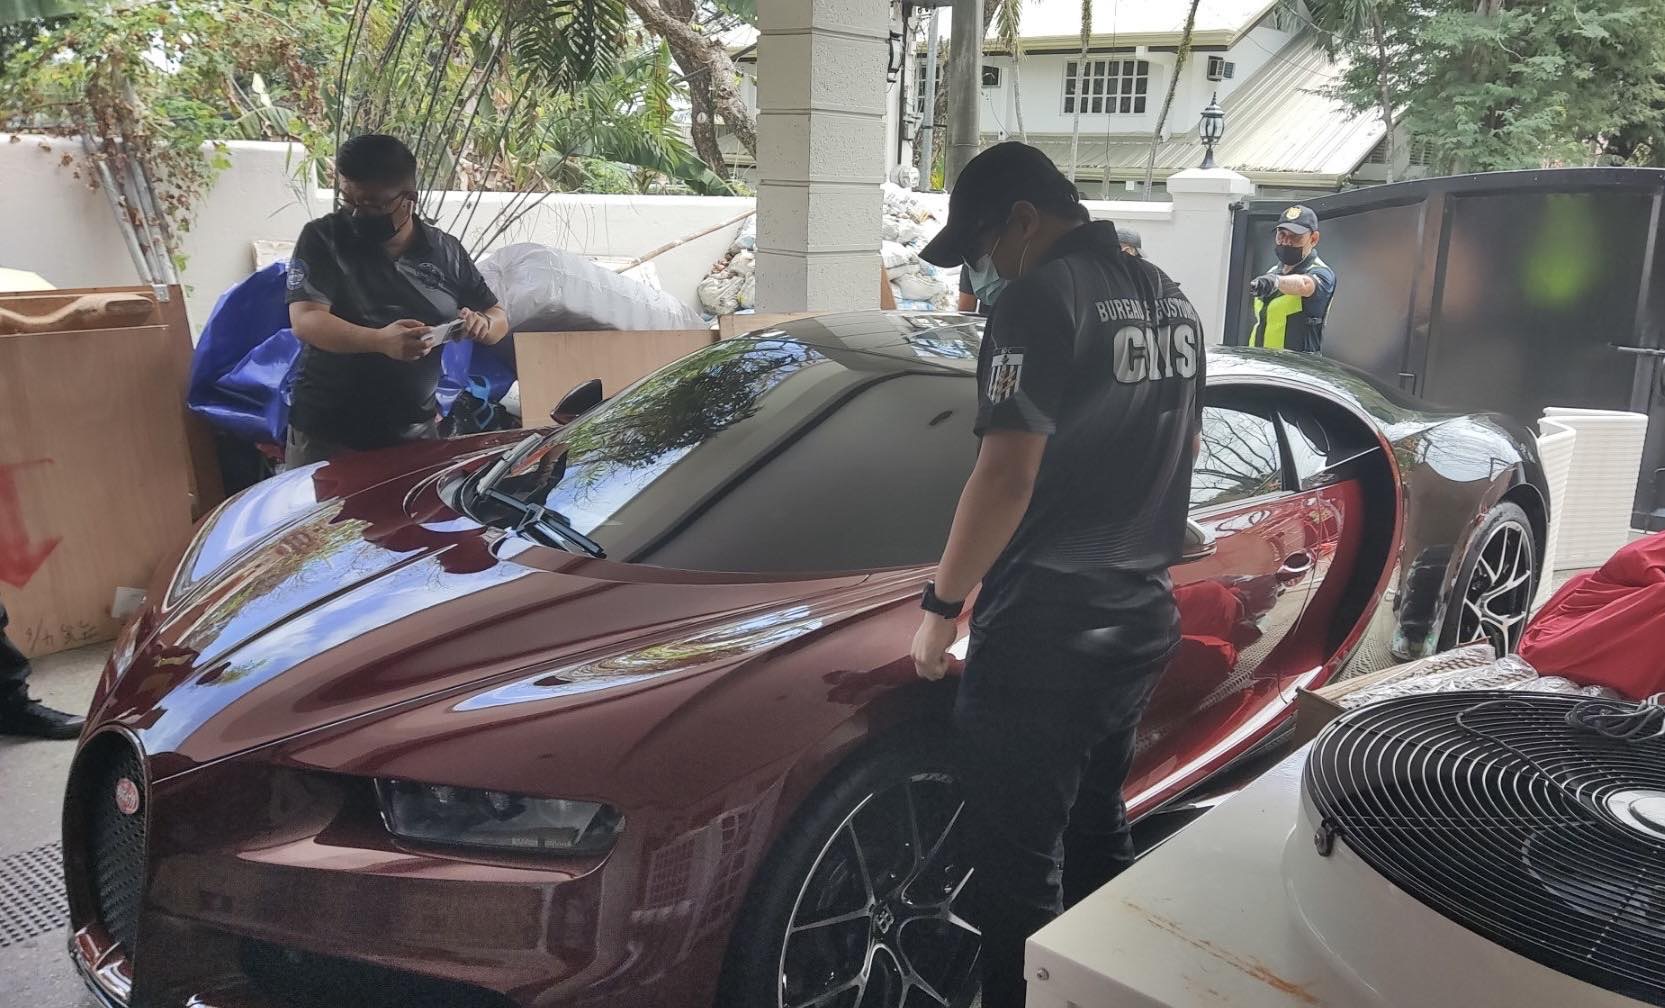 Philippines Customs Confiscates Two Smuggled Bugatti Chirons Entered Without Proper Taxes/Importation Documents